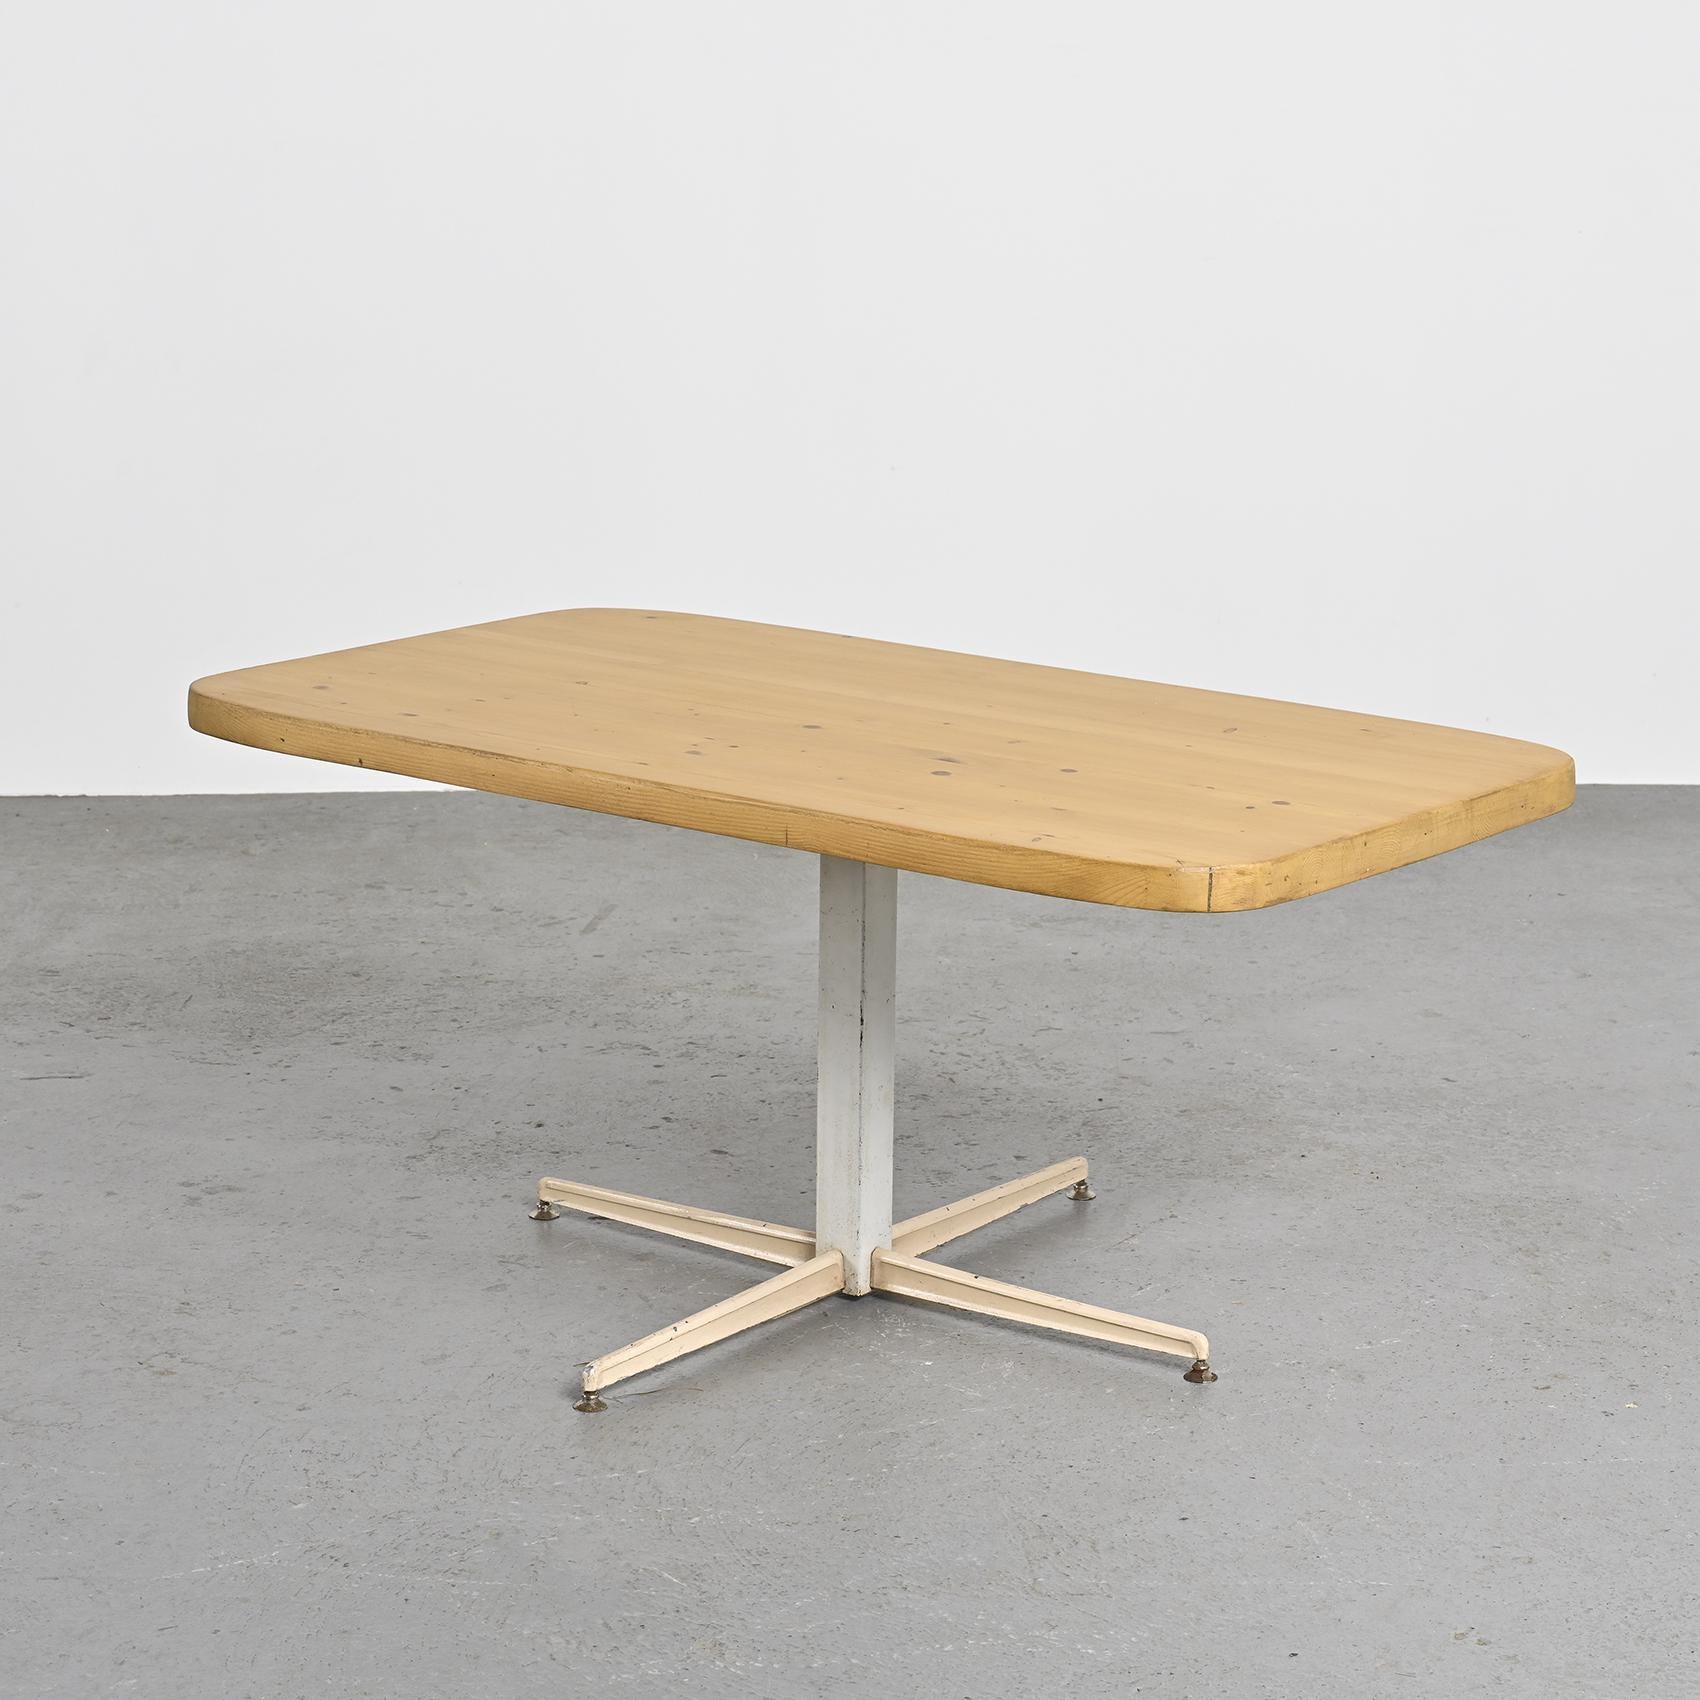 Metal Adjustable table by Charlotte Perriand for les Arcs, circa 1973